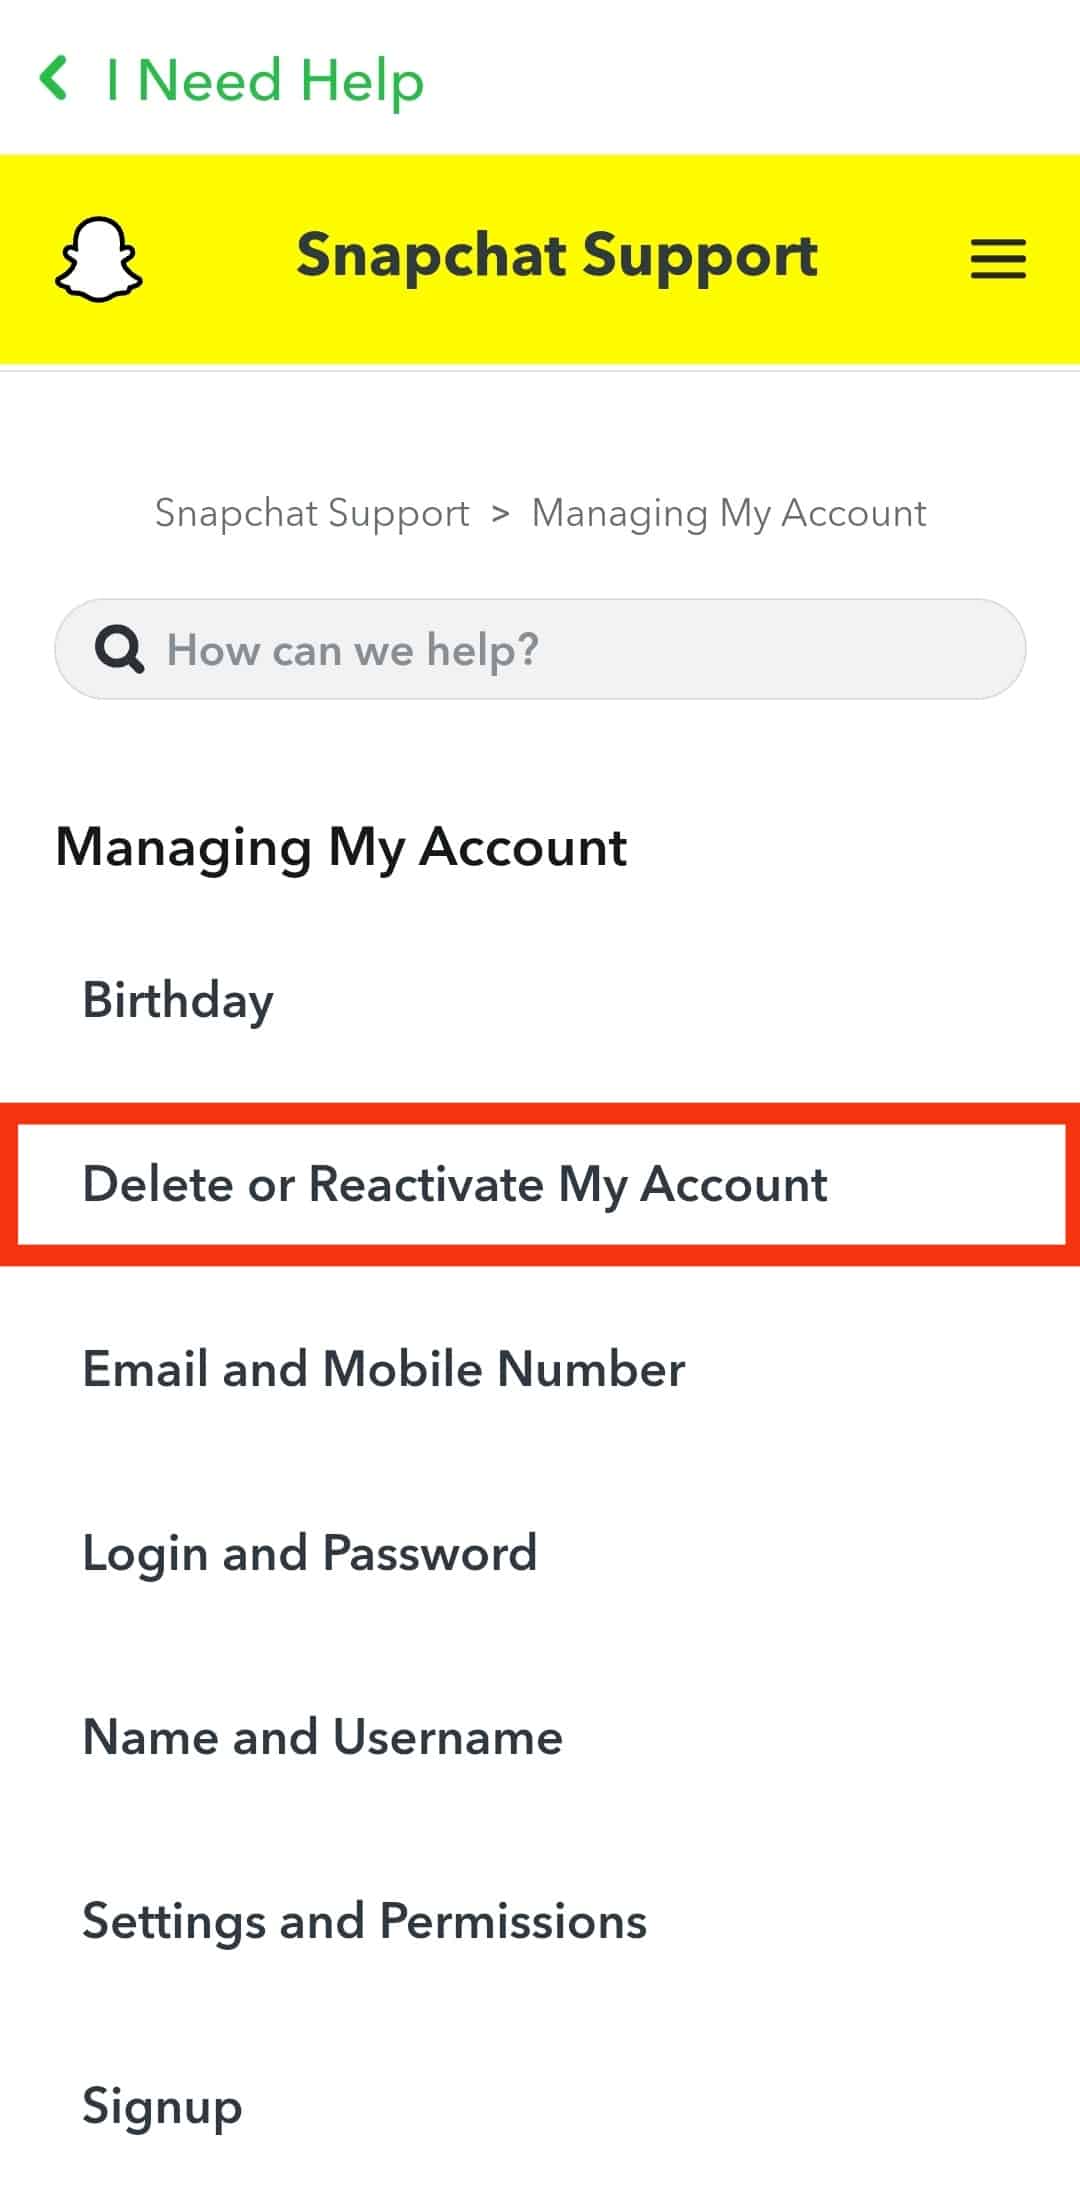 Select Delete Or Reactivate My Account